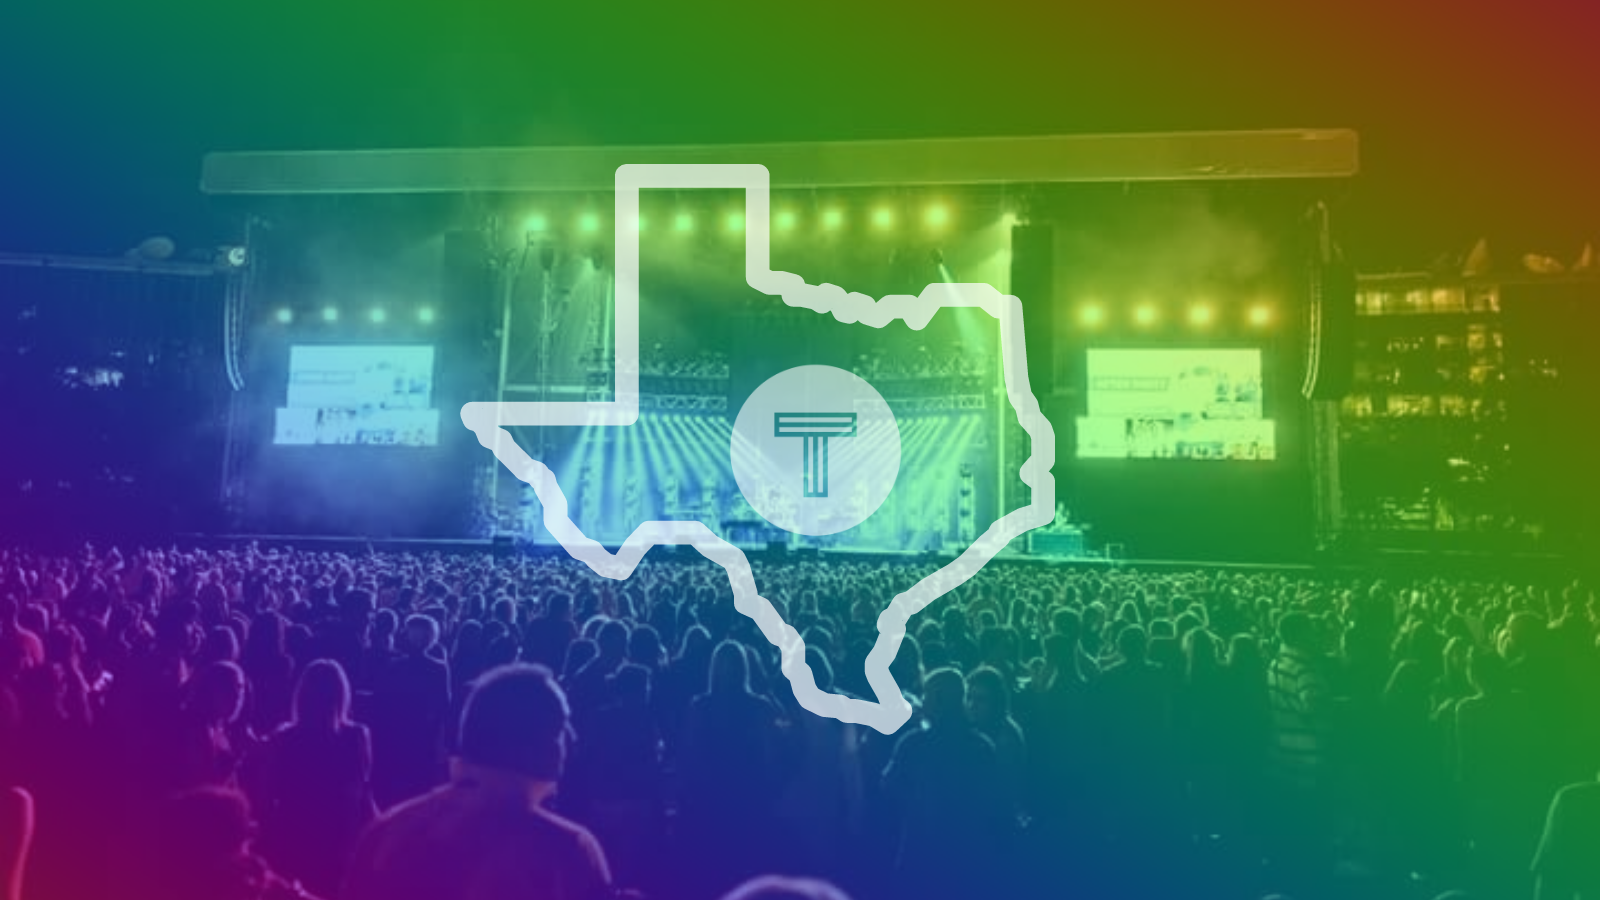 Festival crowd with rainbow overlay and state of Texas outline